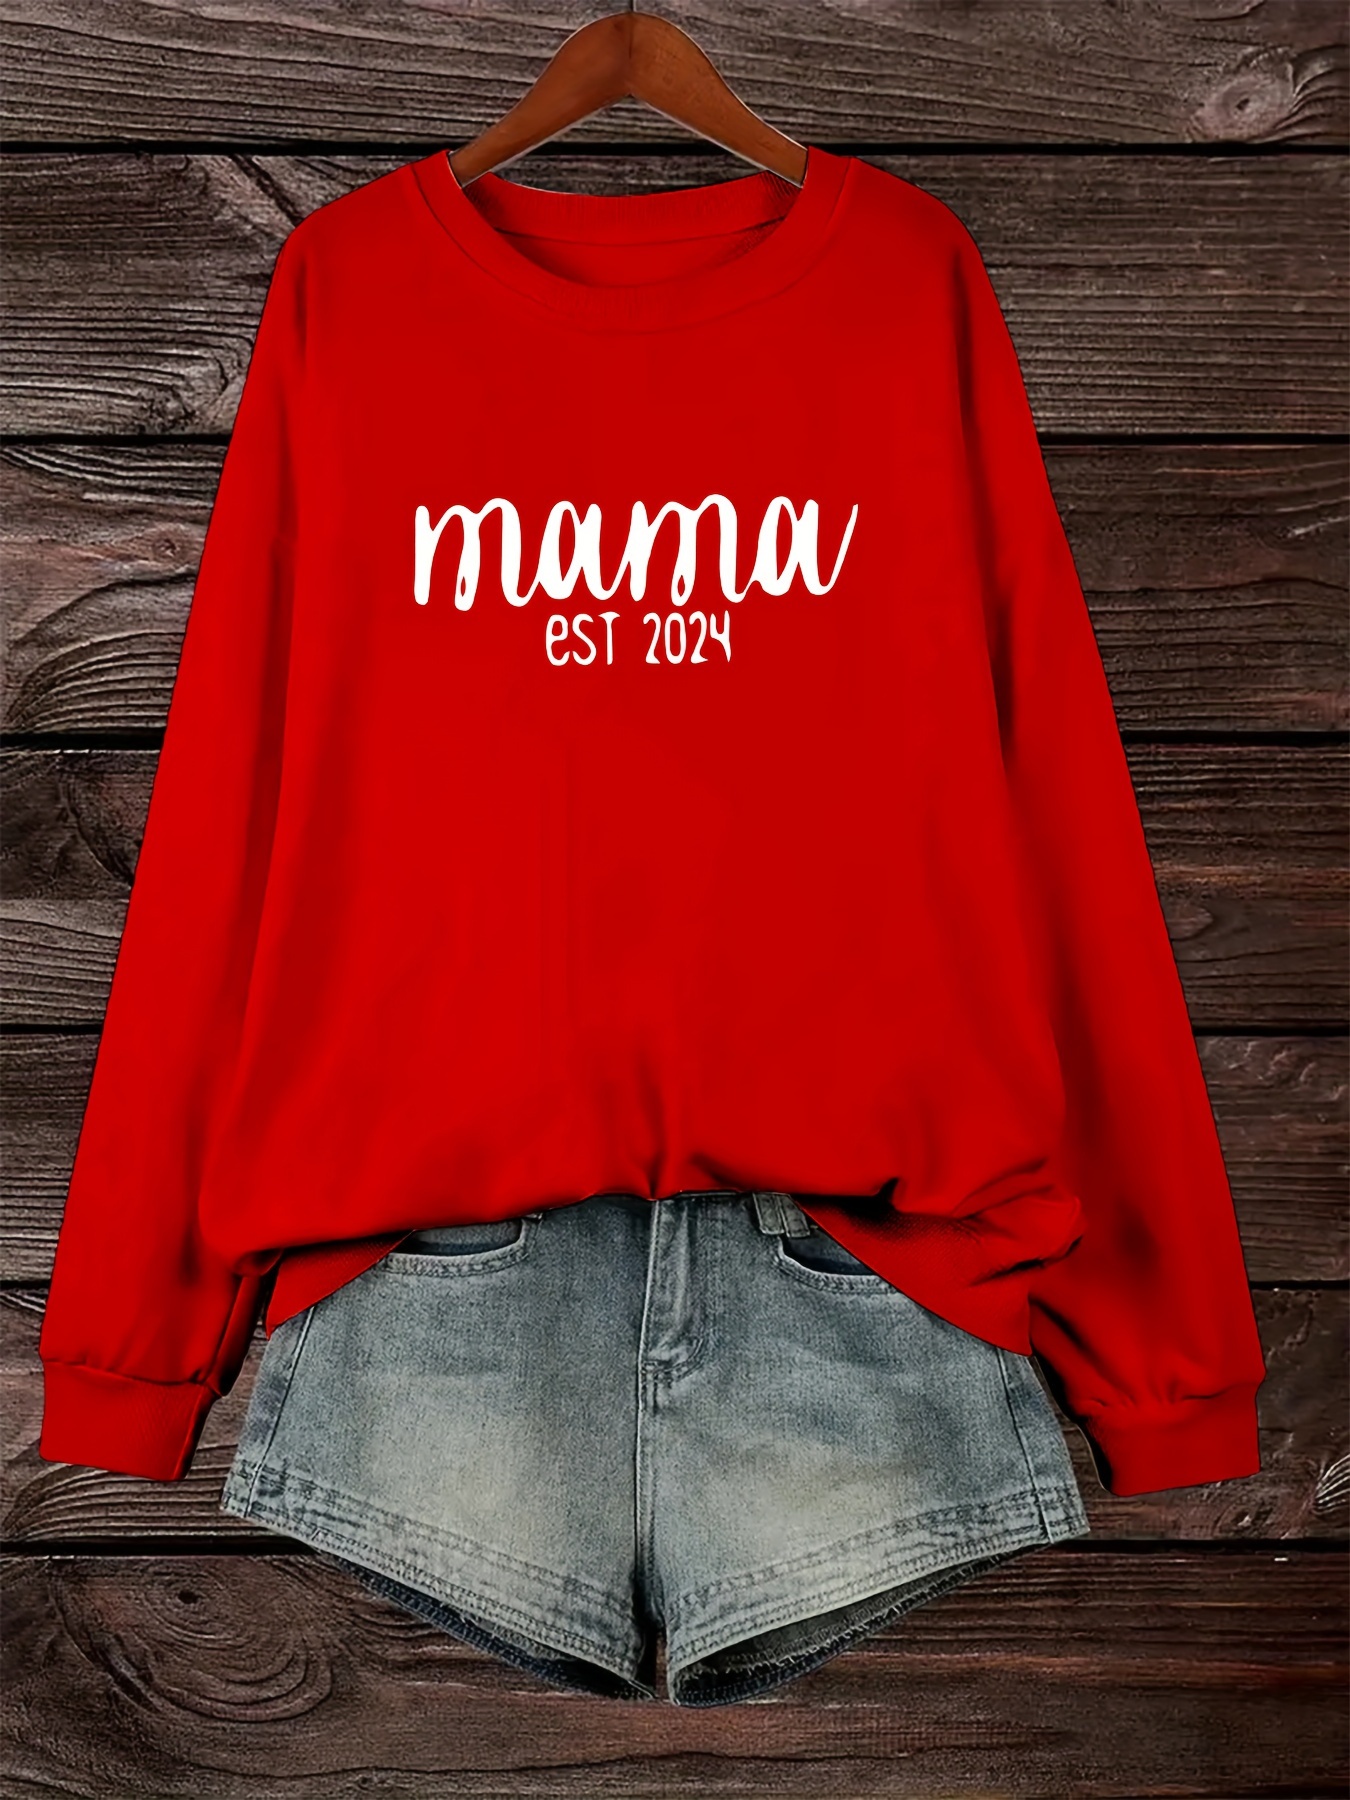 Buy the Womens Red Printed Long Sleeve Crew Neck Pullover T-Shirt Size XL